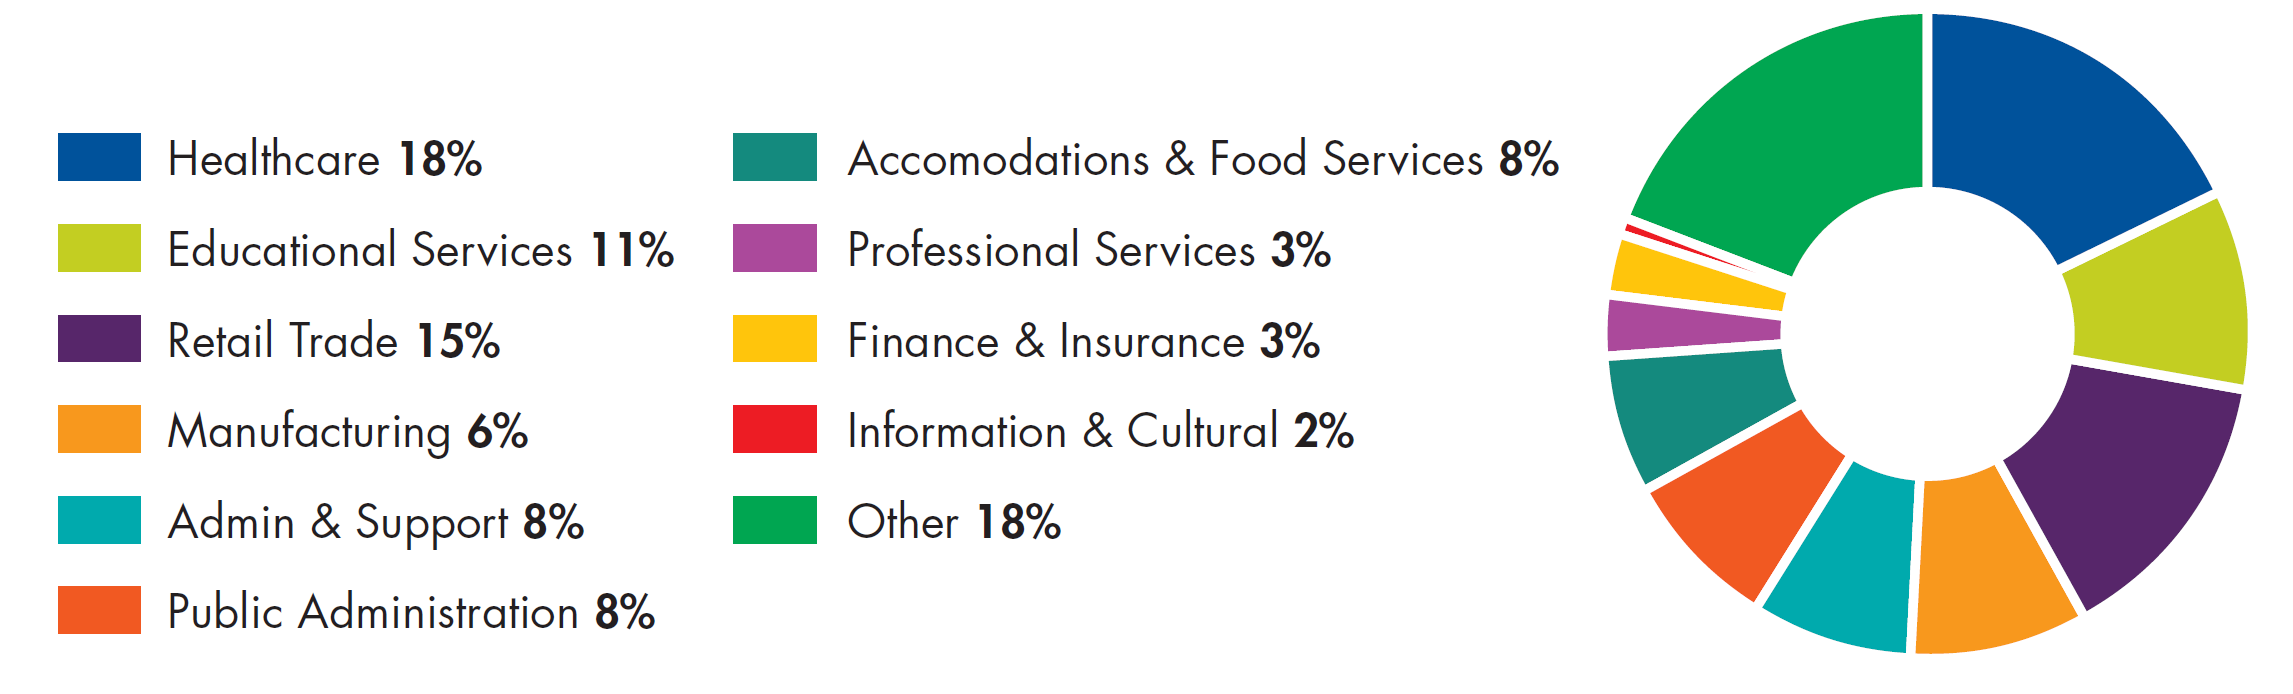 A circle pie chart is located to the right with various vibrant colours reflecting the employment breakdown of the Northwood employment breakdown. 18% healthcare, 11% education, 15% retail, 6% manufacturing, 8% administration support, 8% public administration, 8% accomodations and food services, 3% professional services, 3%finance and insurance, 2% information and cultural, 18% other 